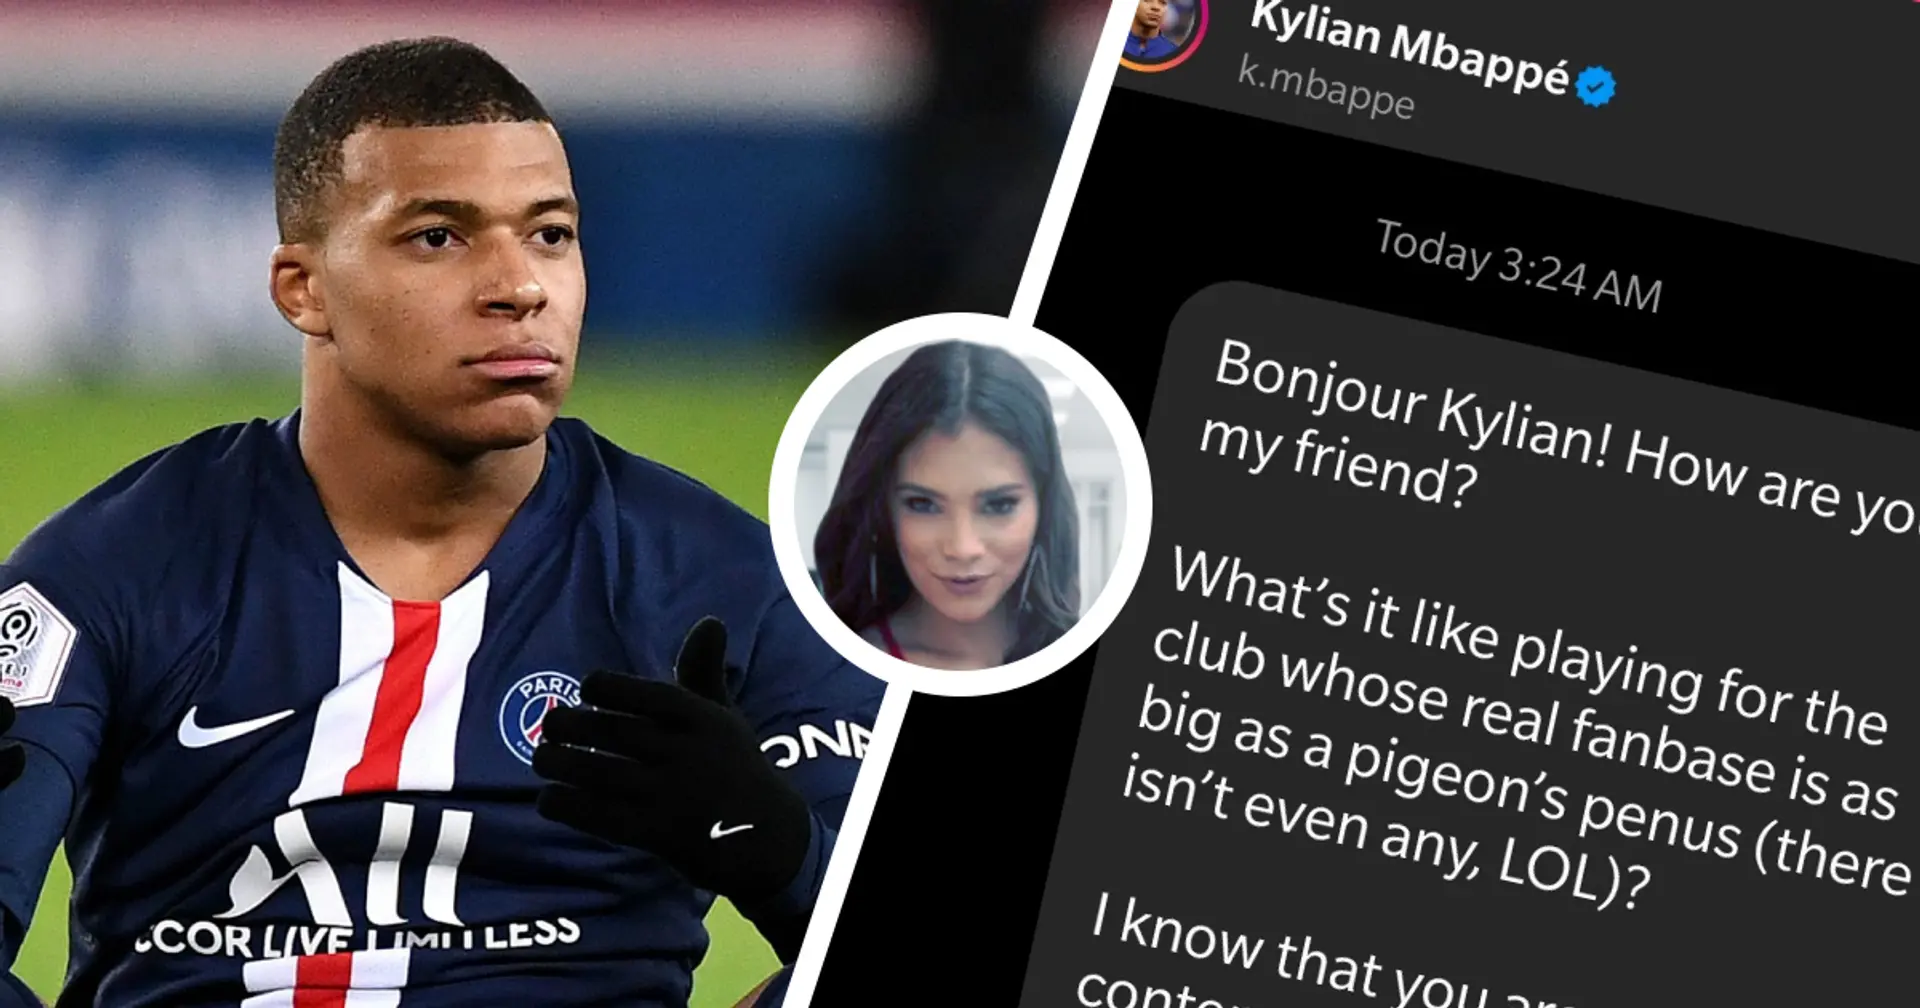 'All the sexiest Barcelona women waiting for you': I messaged Mbappe urging him to sign for Barca